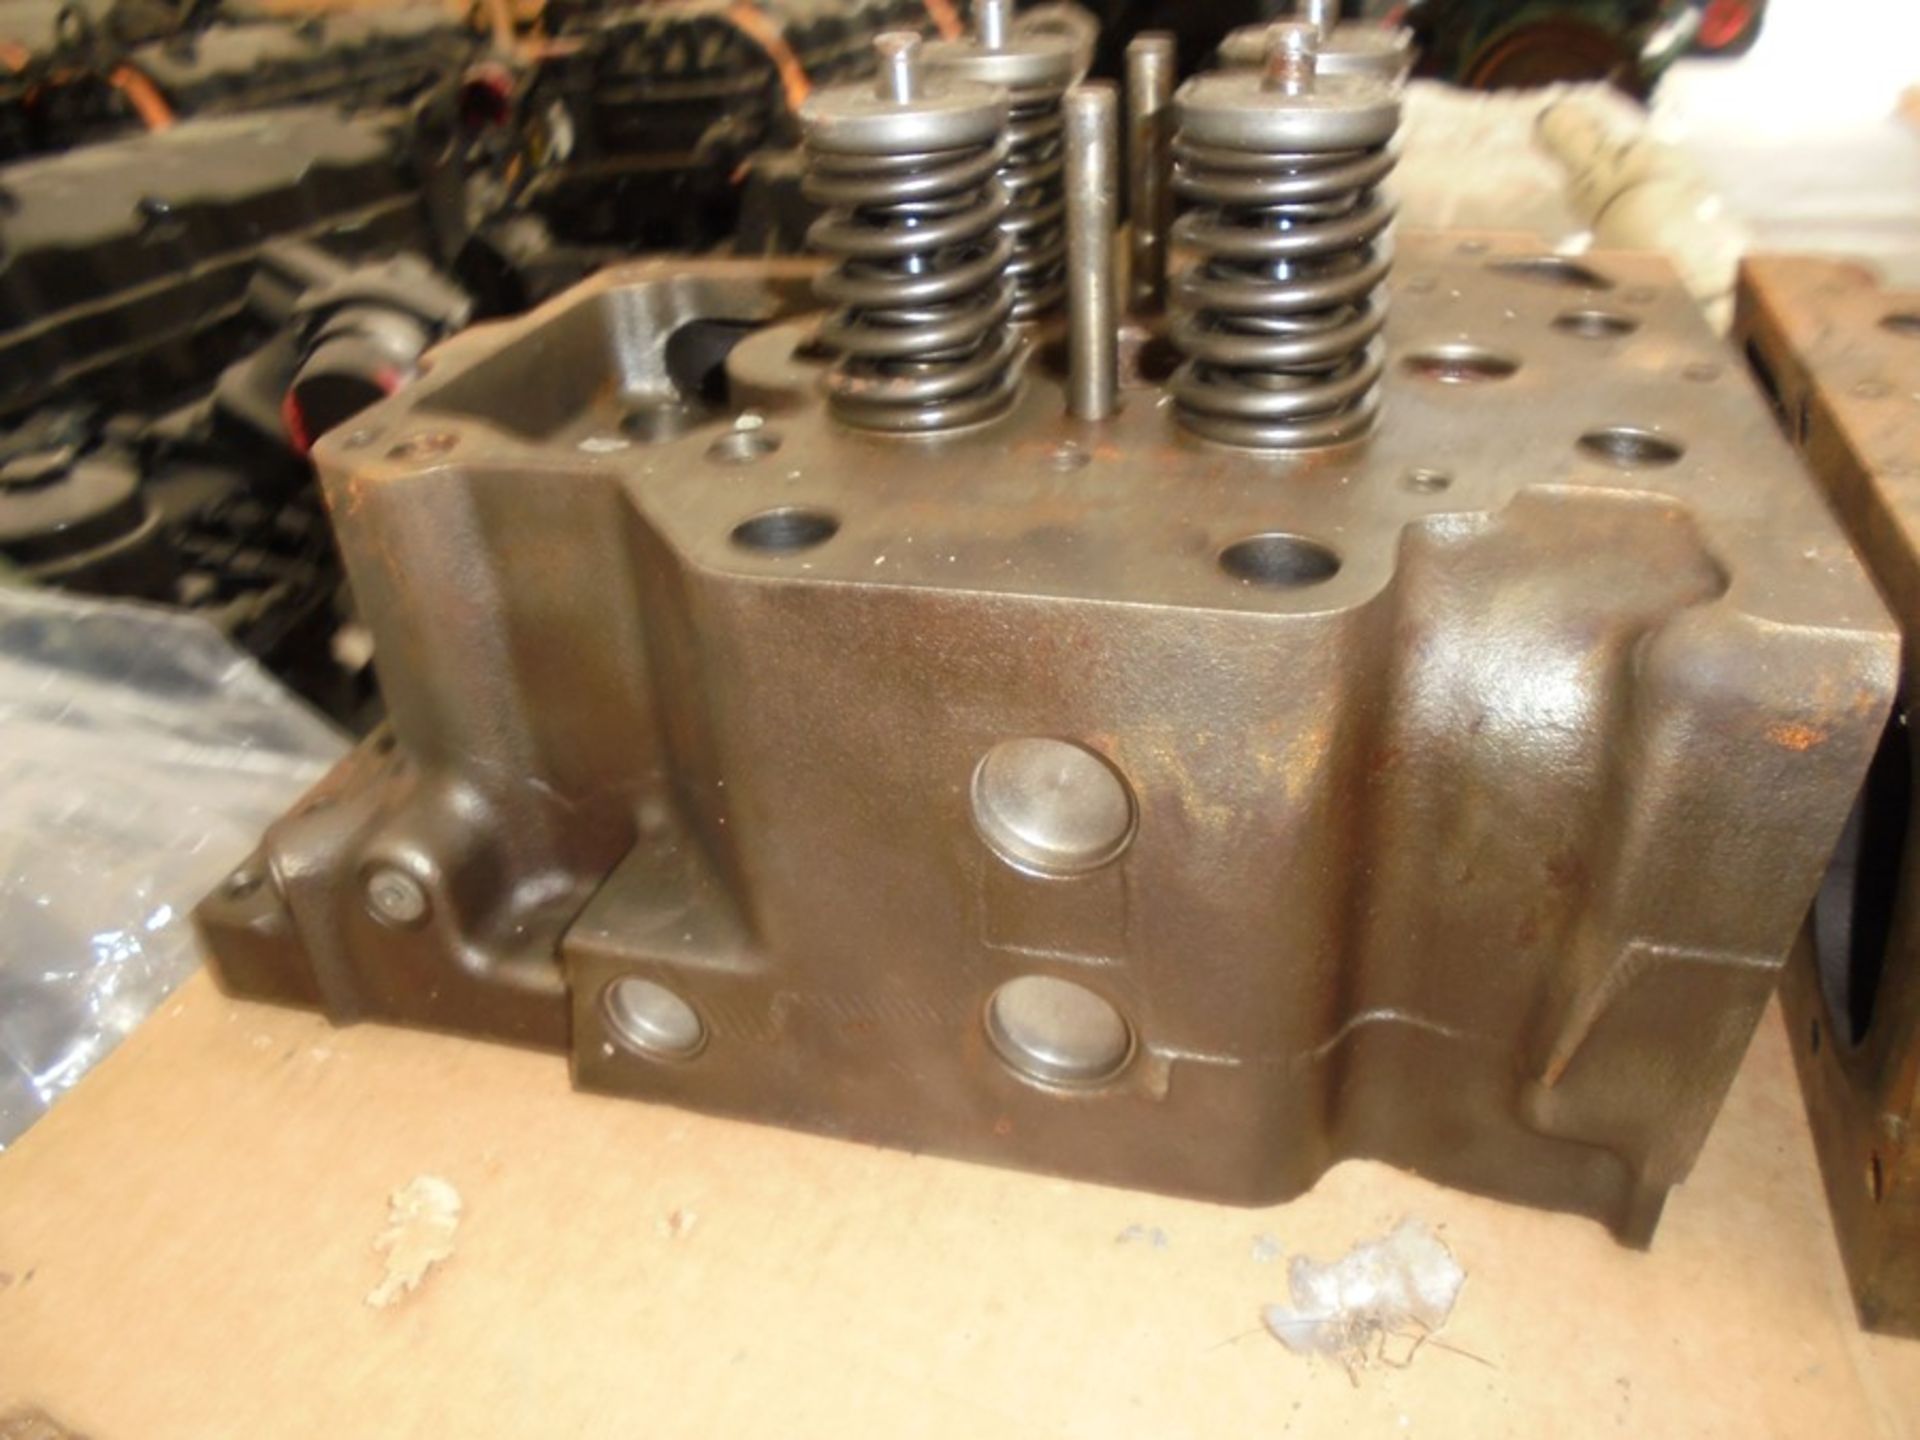 8 x used Caterpillar 3516 cylinder heads, part numbers 205-1560 and 20R3547 (mostly without valves). - Image 2 of 6